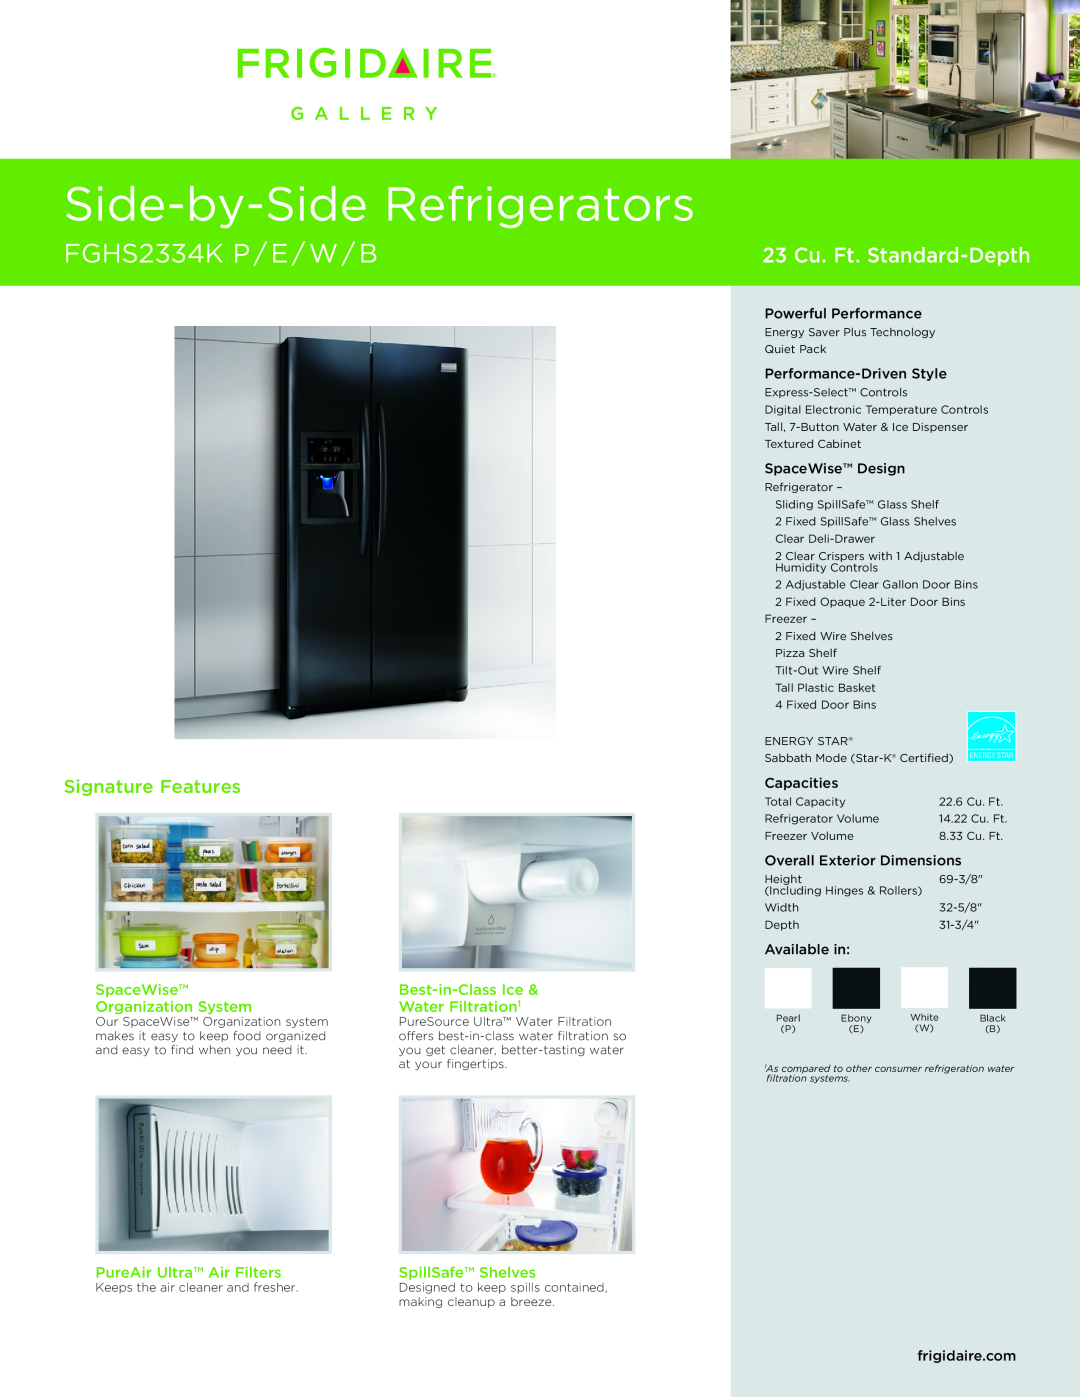 Frigidaire FGHS2334KW dimensions SpaceWise, Best-in-ClassIce, Organization System, Water Filtration1, SpillSafe Shelves 